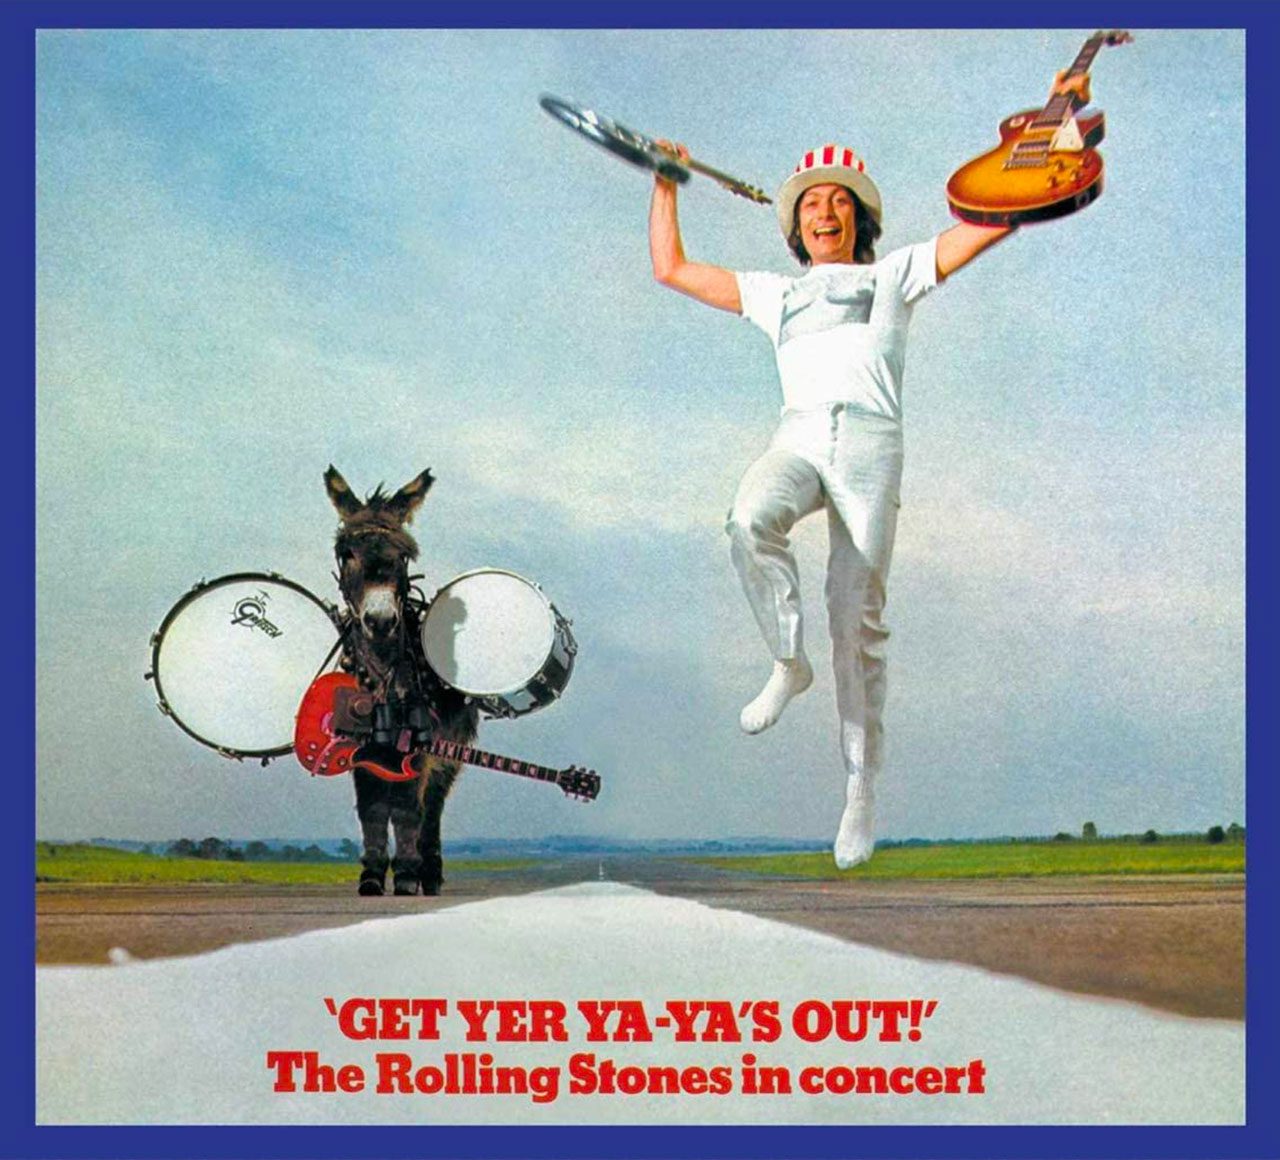 The Rolling Stones - Get Yer Ya-Ya’s Out! cover album